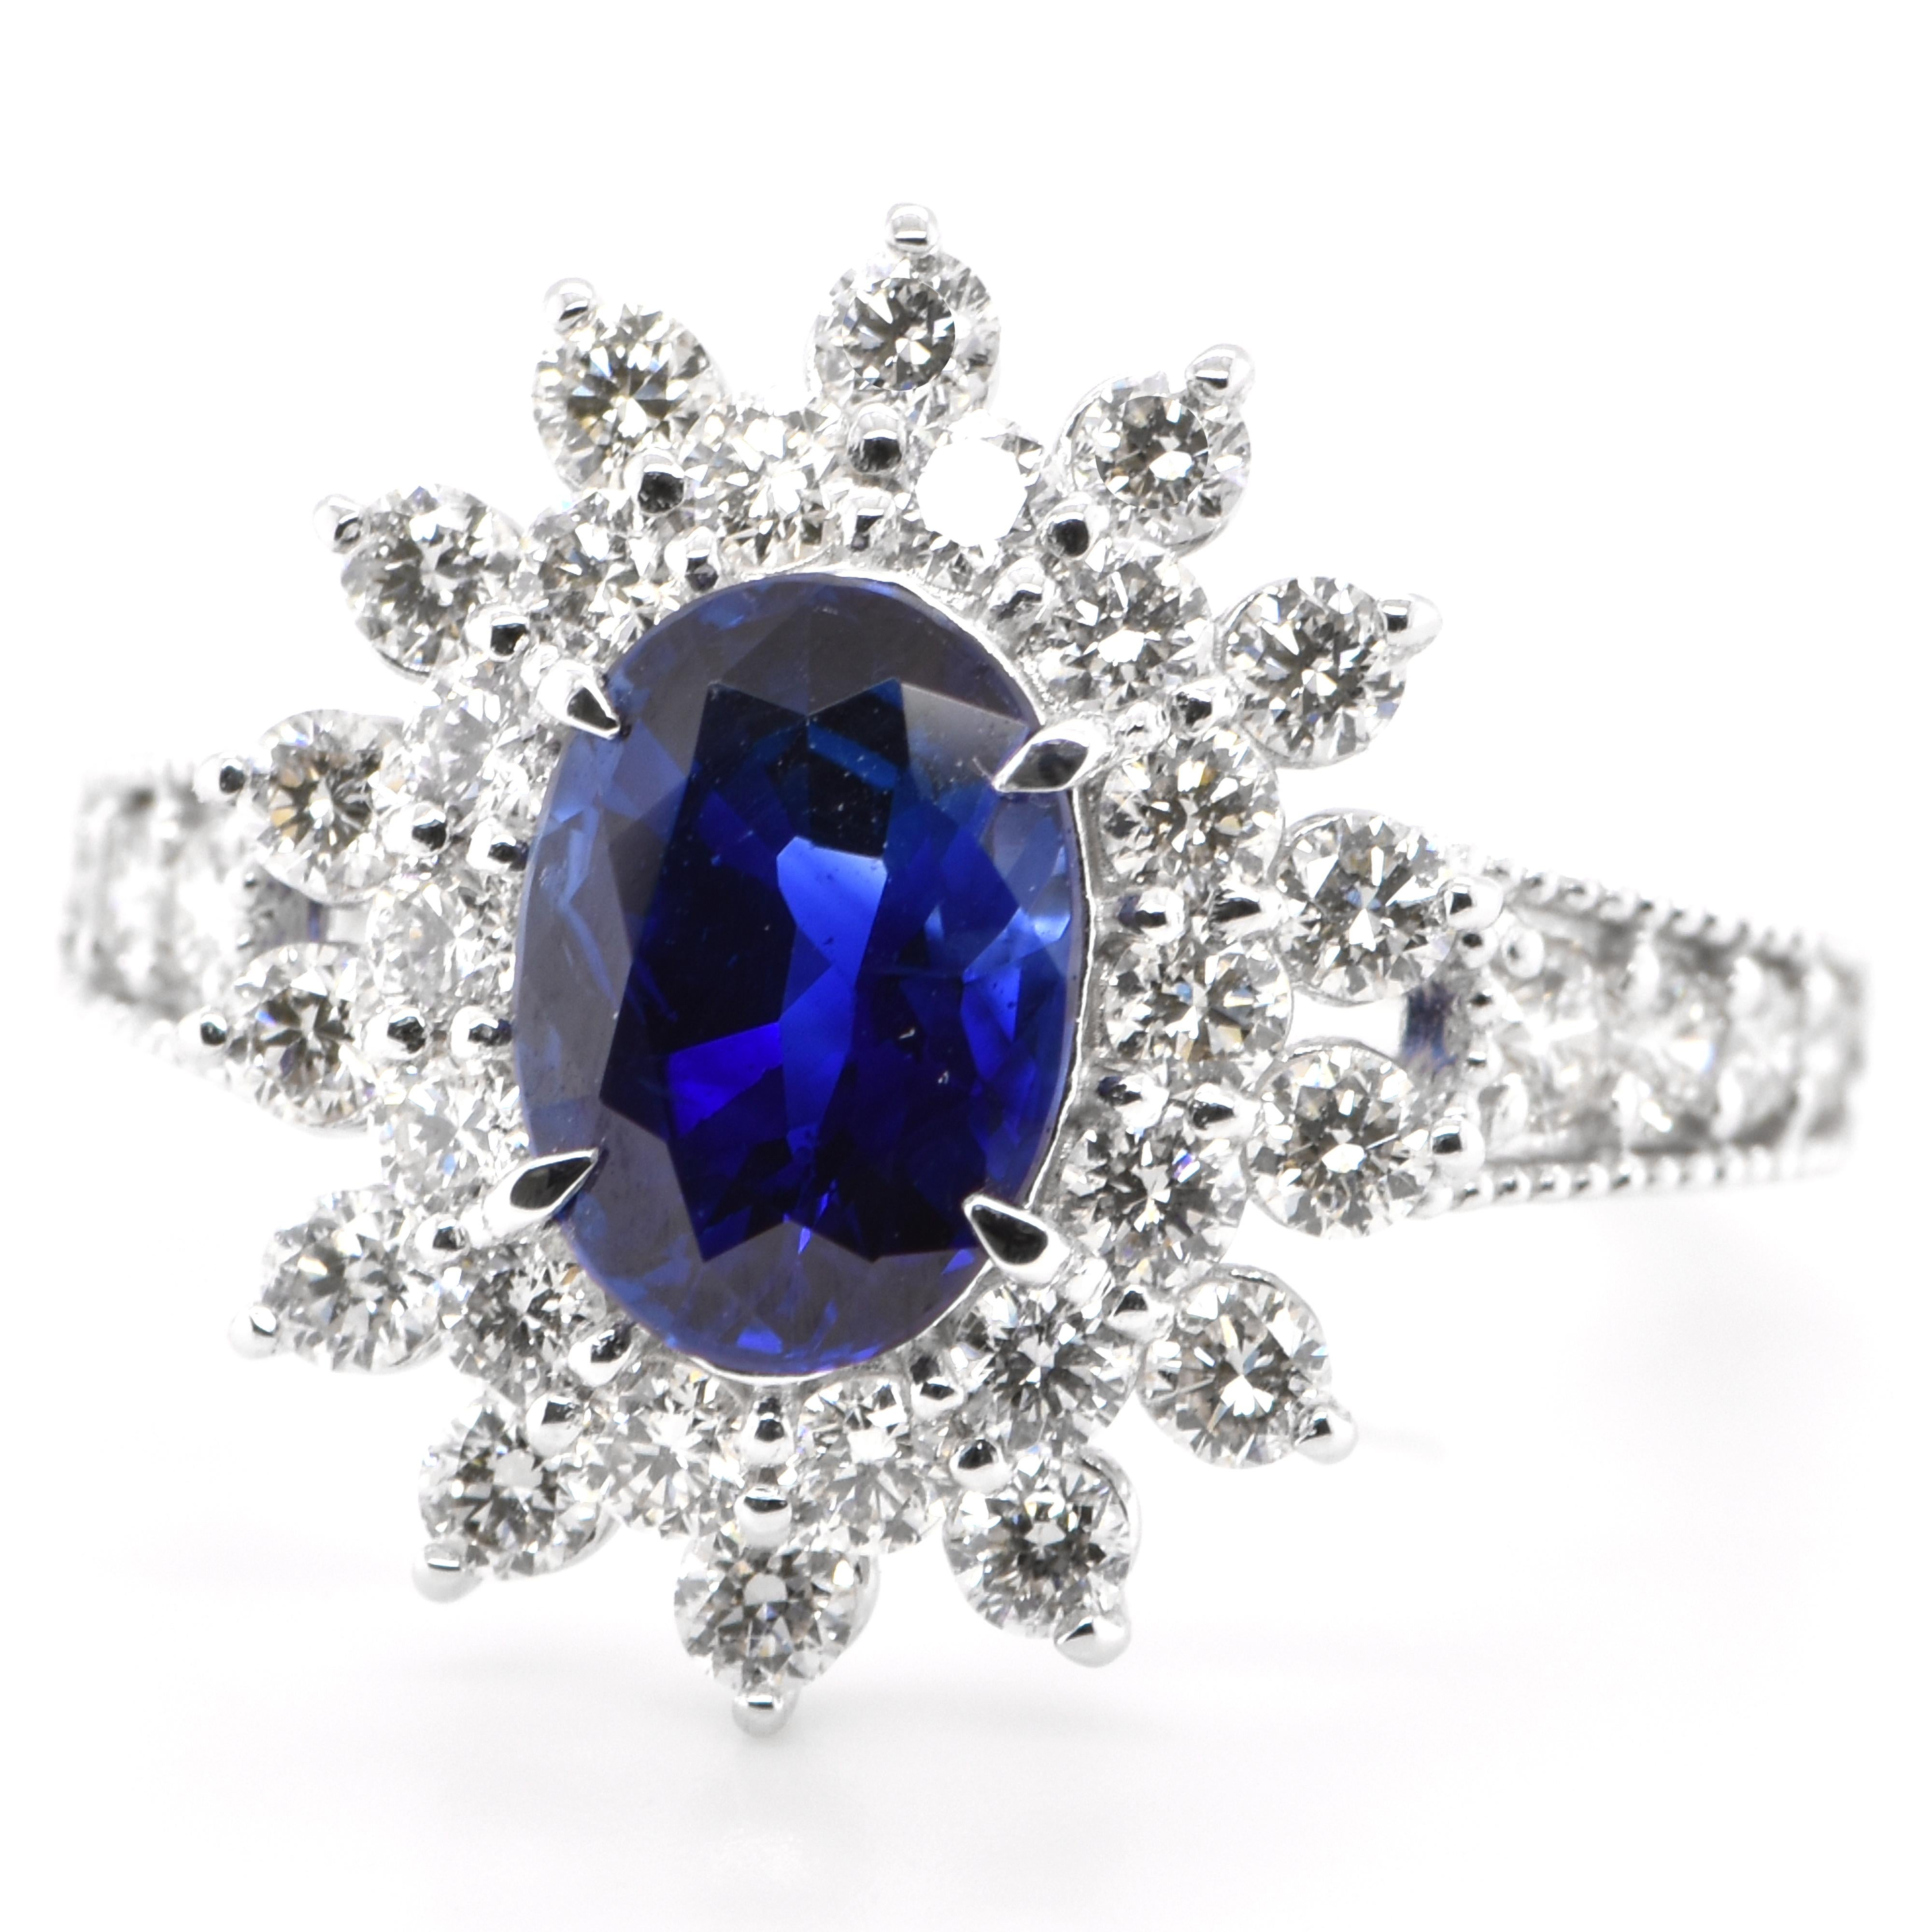 A beautiful Ring featuring a GIA Certified 1.73 Carat Natural Madagascar Blue Sapphire and 1.08 Carats Diamond Accents set in Platinum. Sapphires have extraordinary durability - they excel in hardness as well as toughness and durability making them